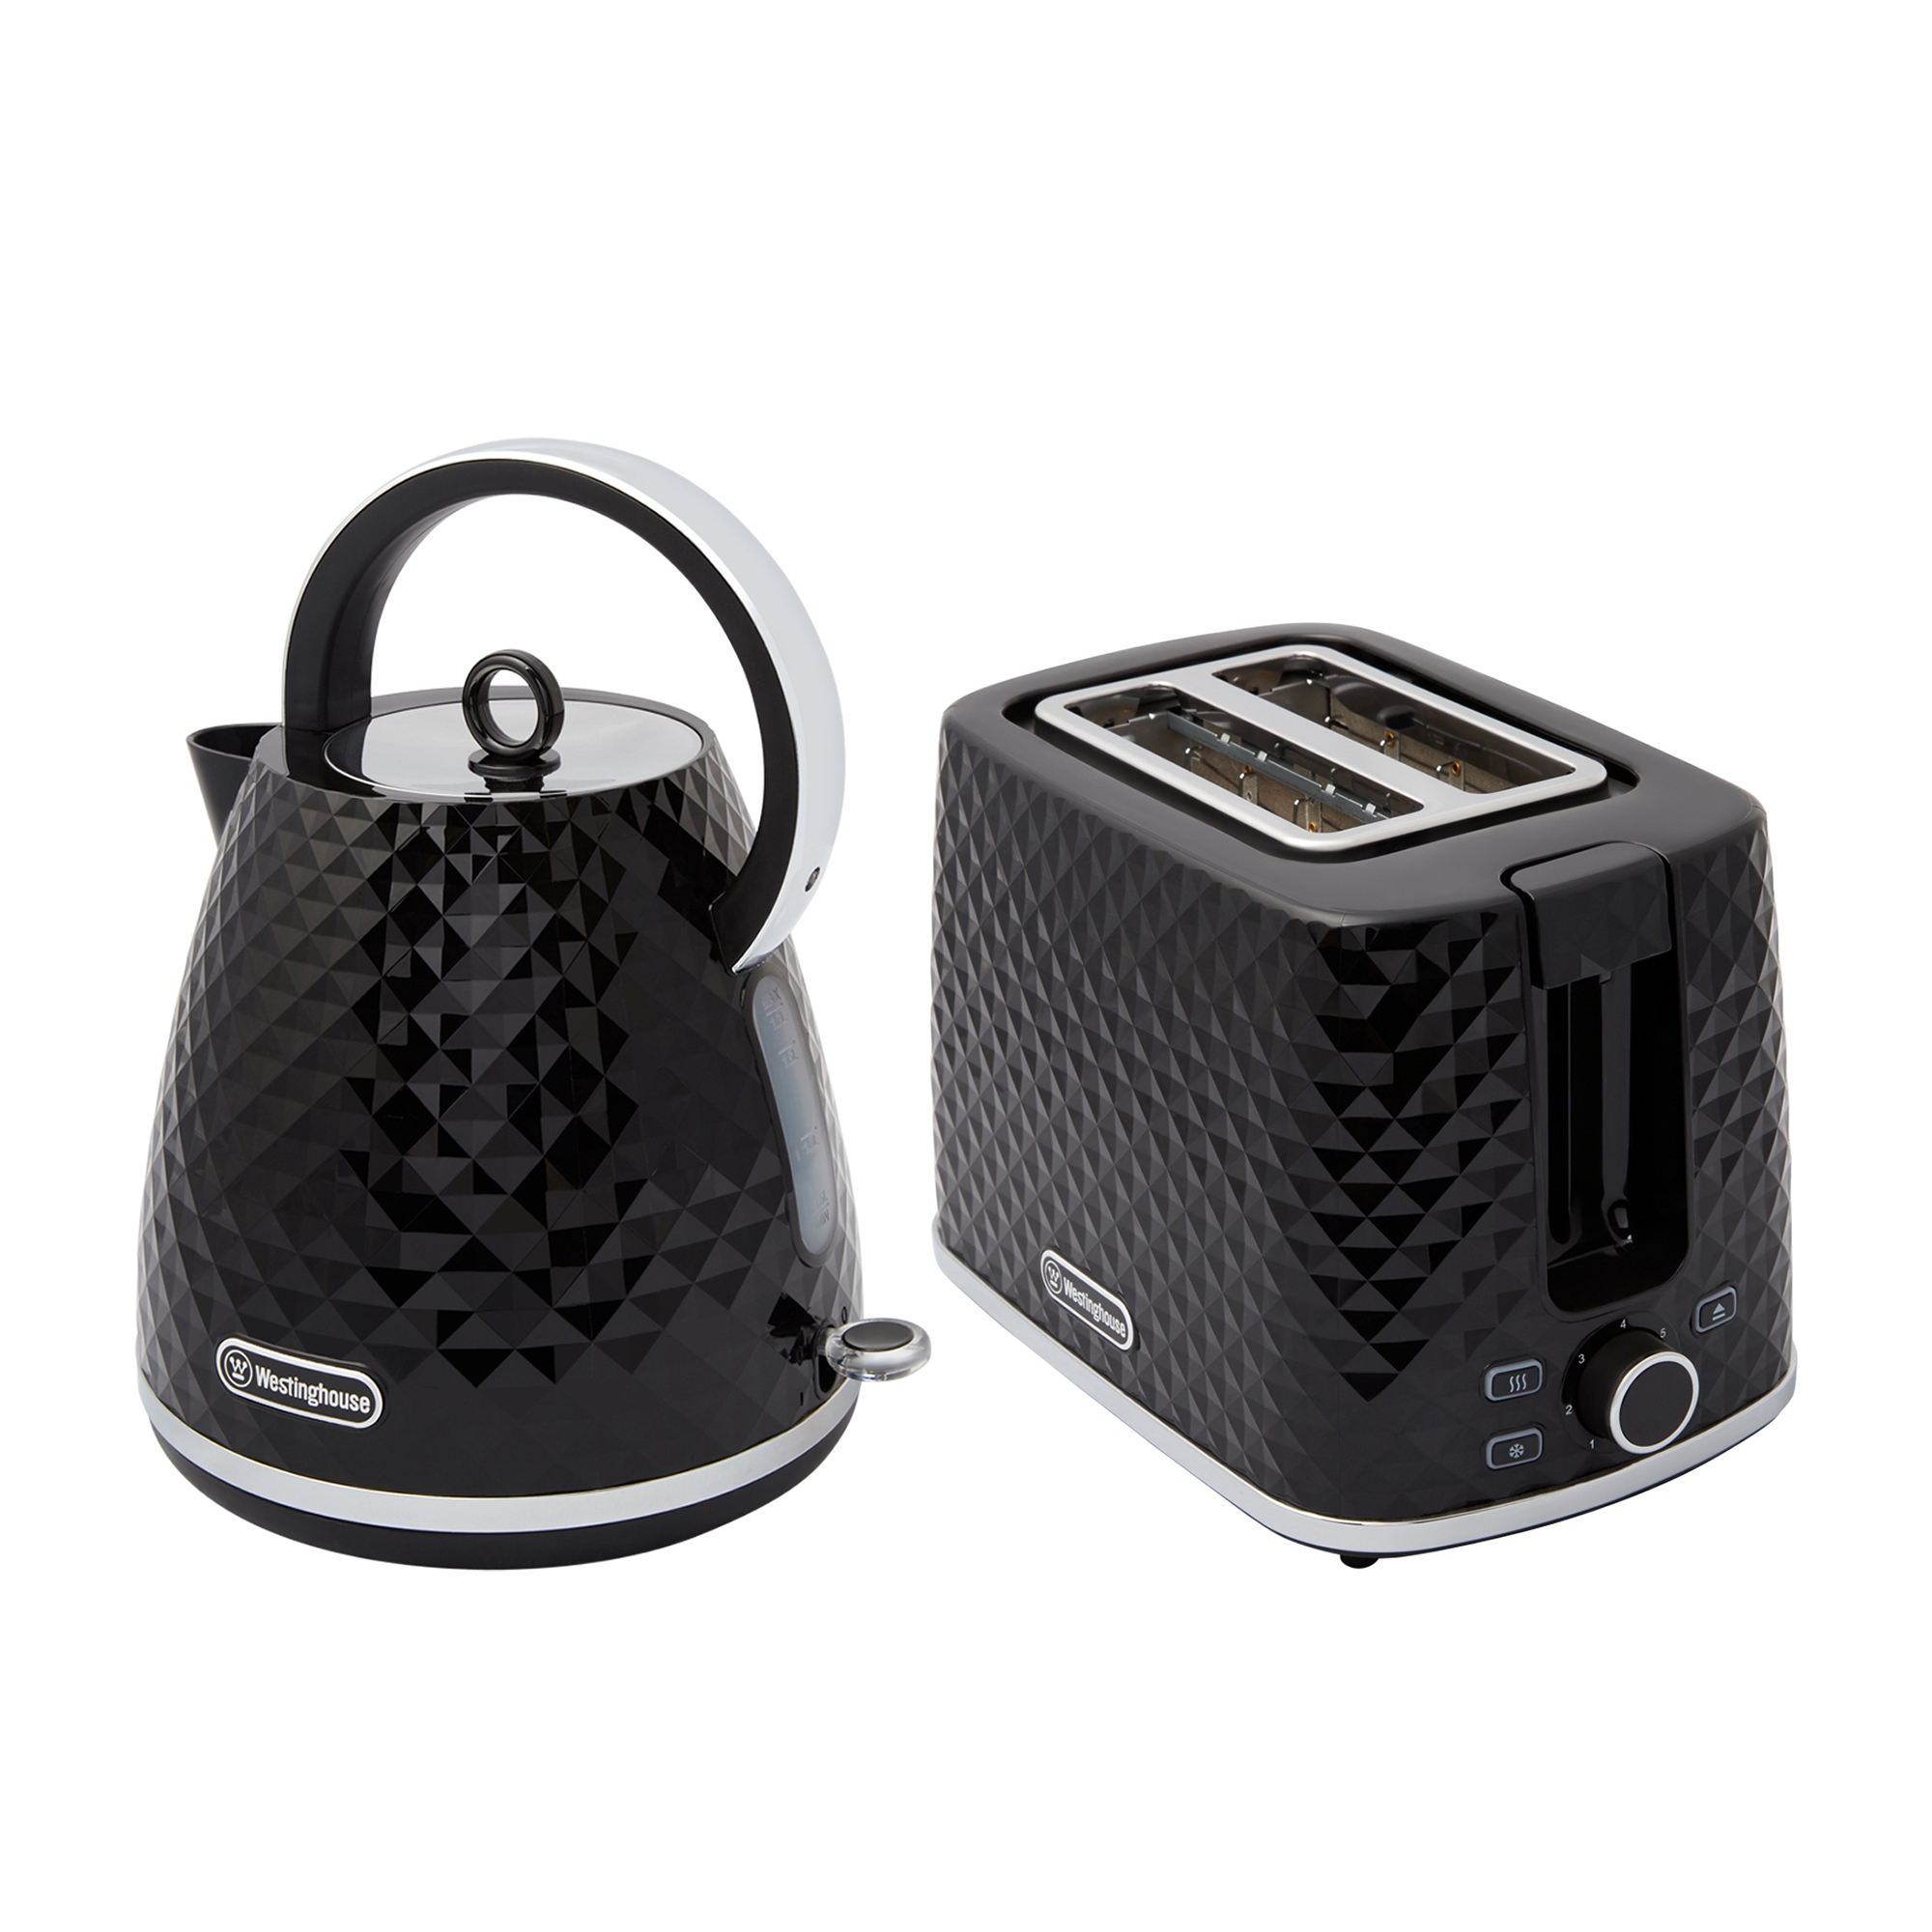 Westinghouse Kettle and Toaster Pack Black - Diamond Pattern Image 2